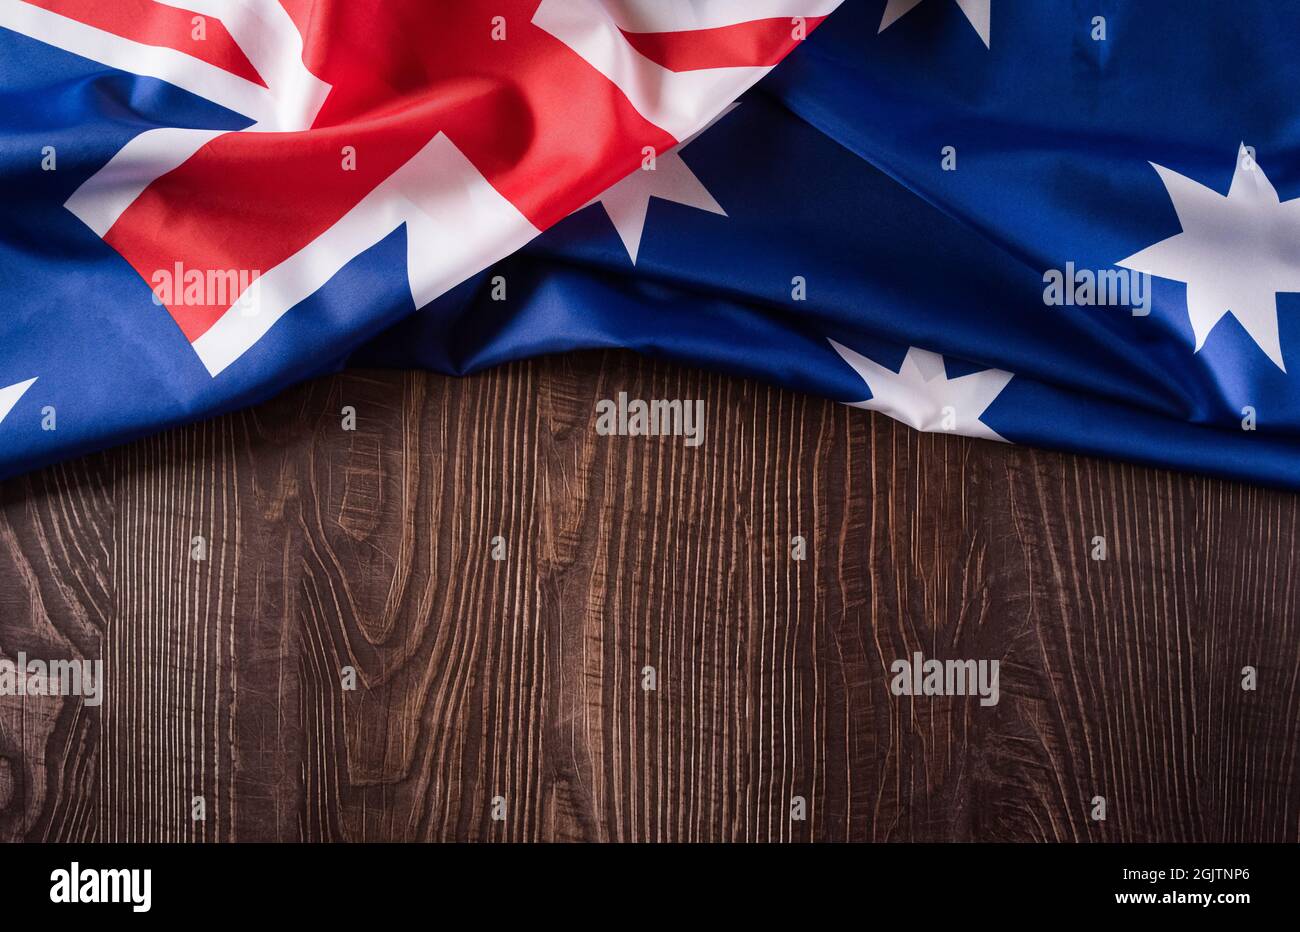 Happy Australia day concept. Australian flag against old wooden background. 26 January - Alamy